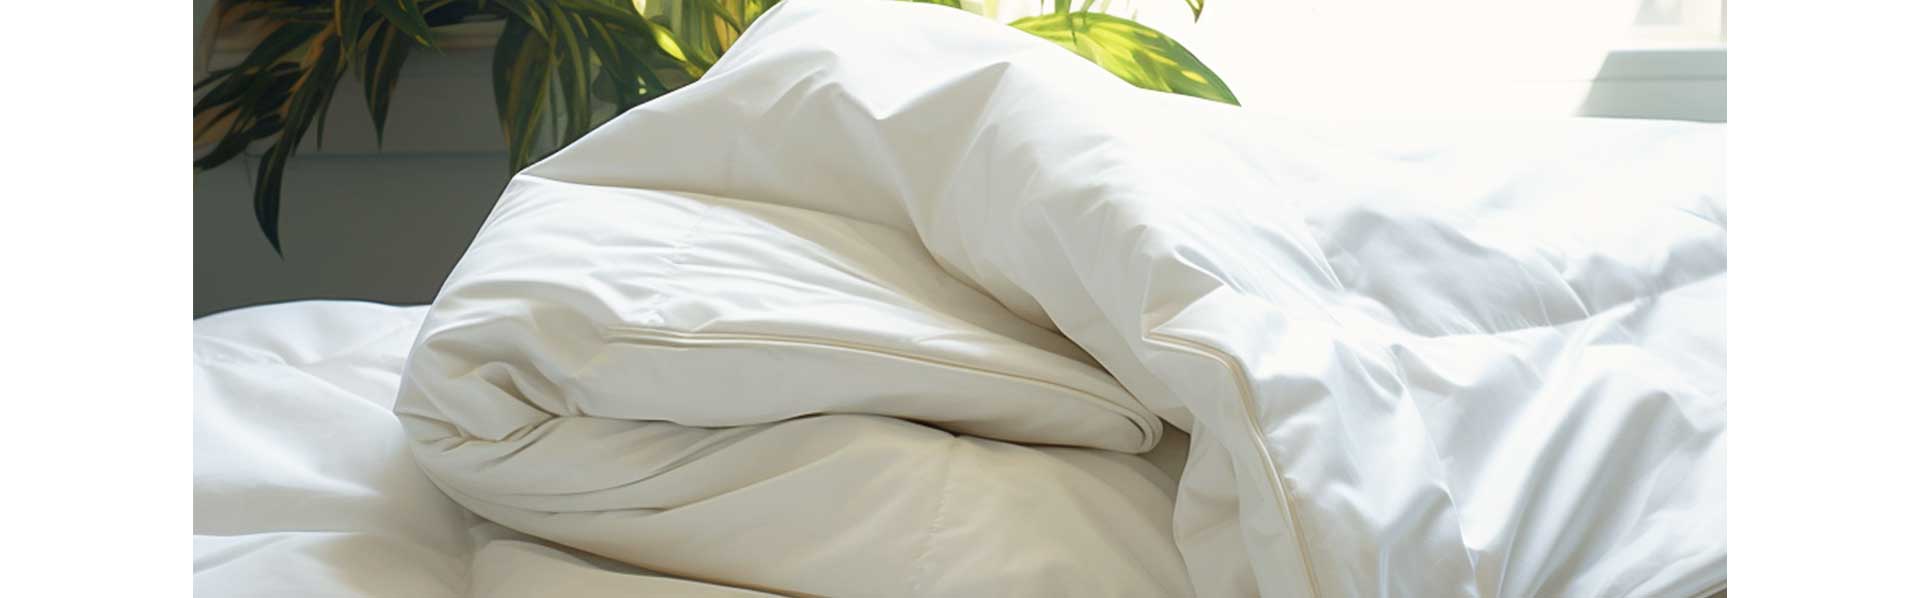 Split tog duvet that is a close up materials to showcase the luxury.